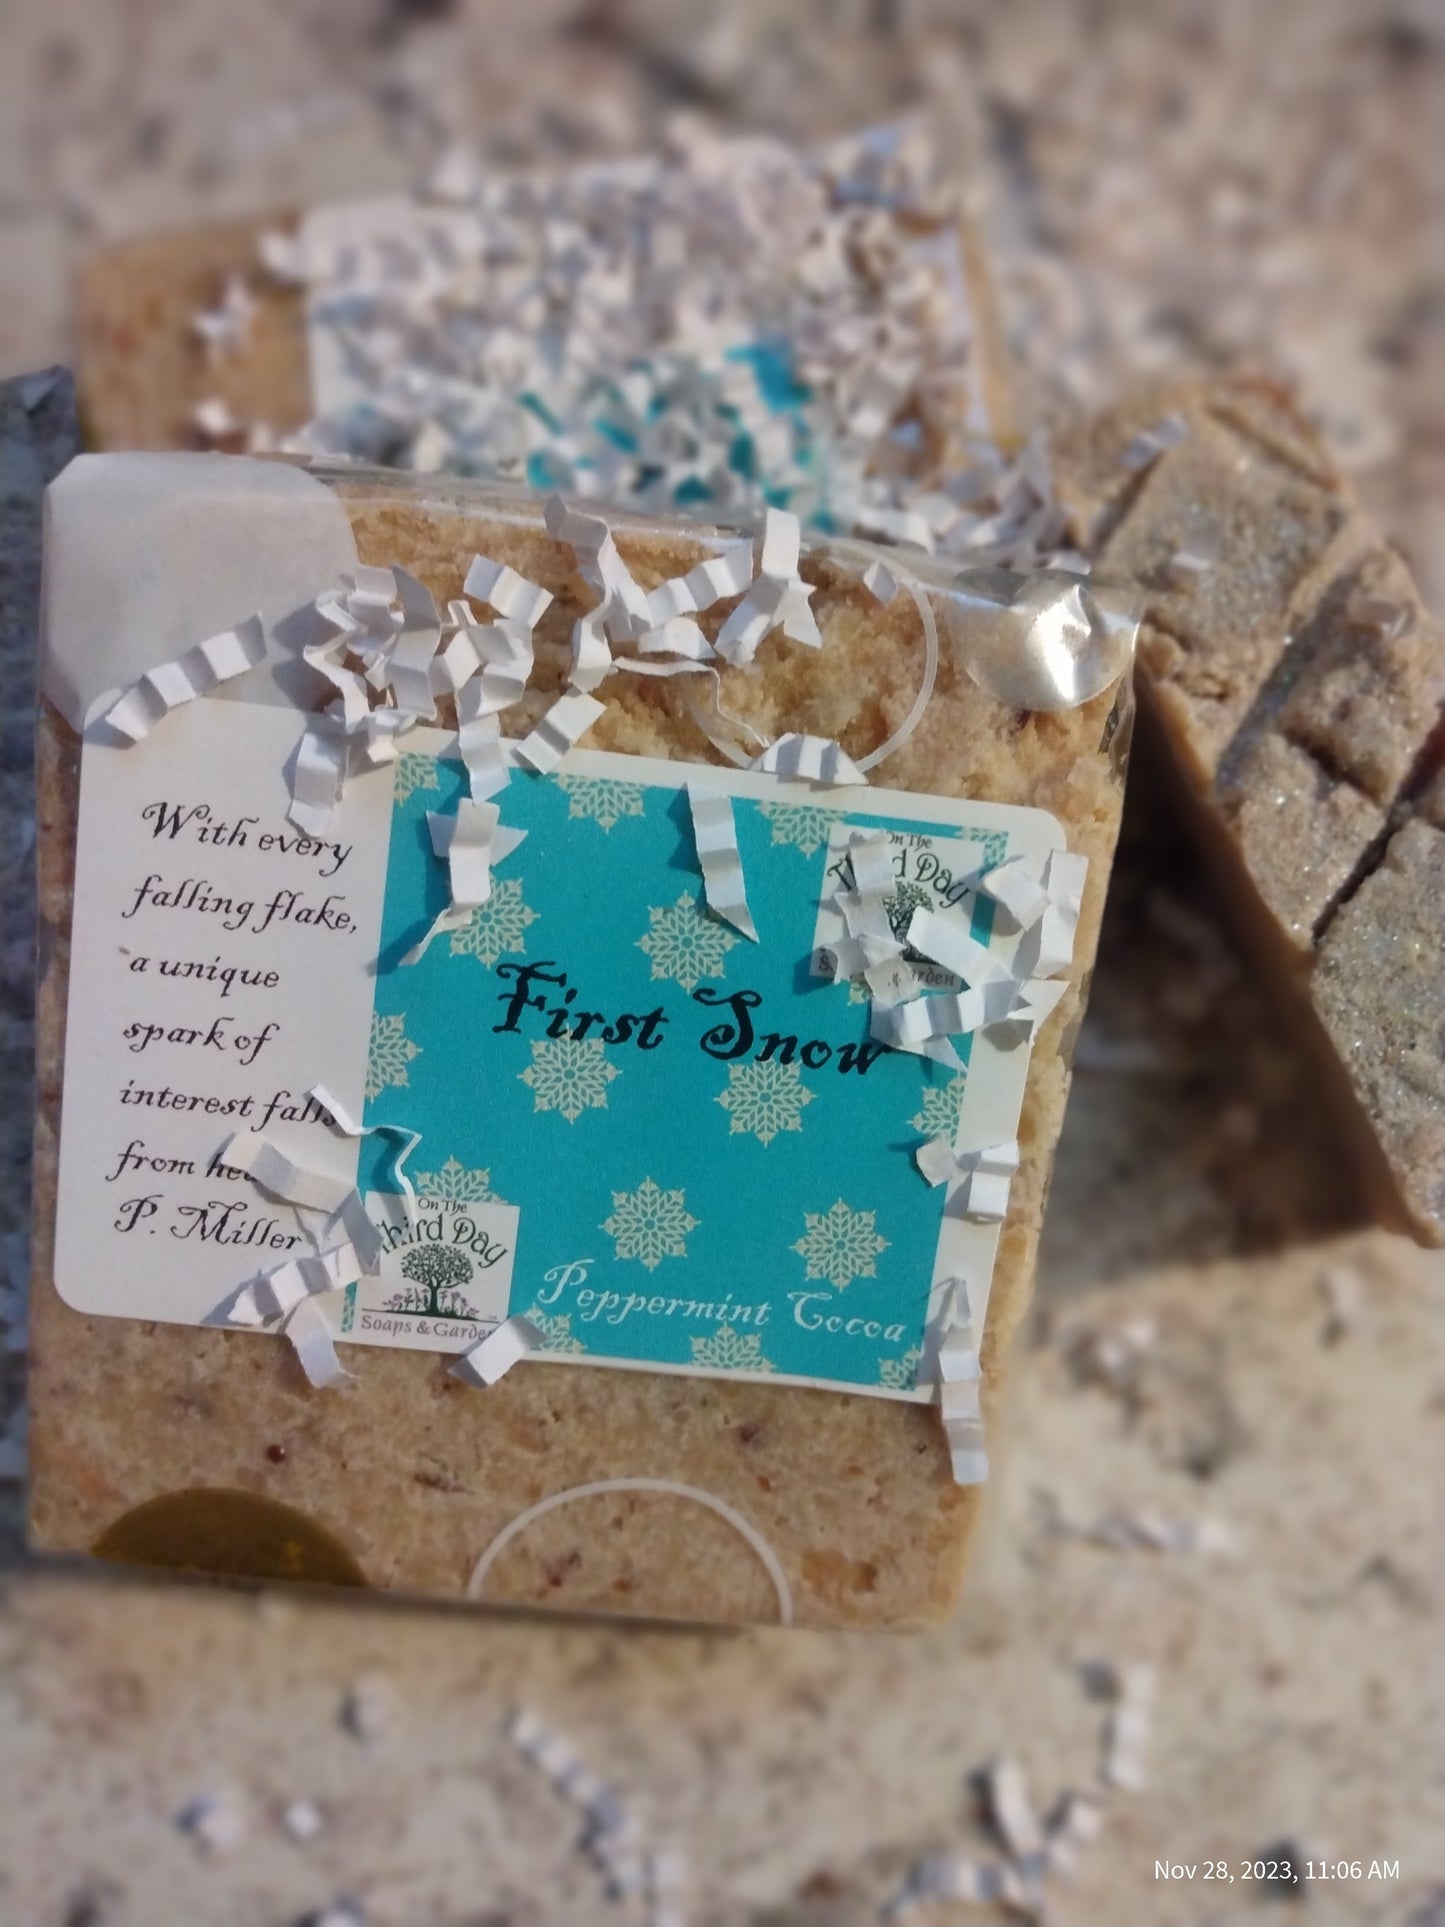 Introducing our enchanting limited edition handmade soap: "First Snow."